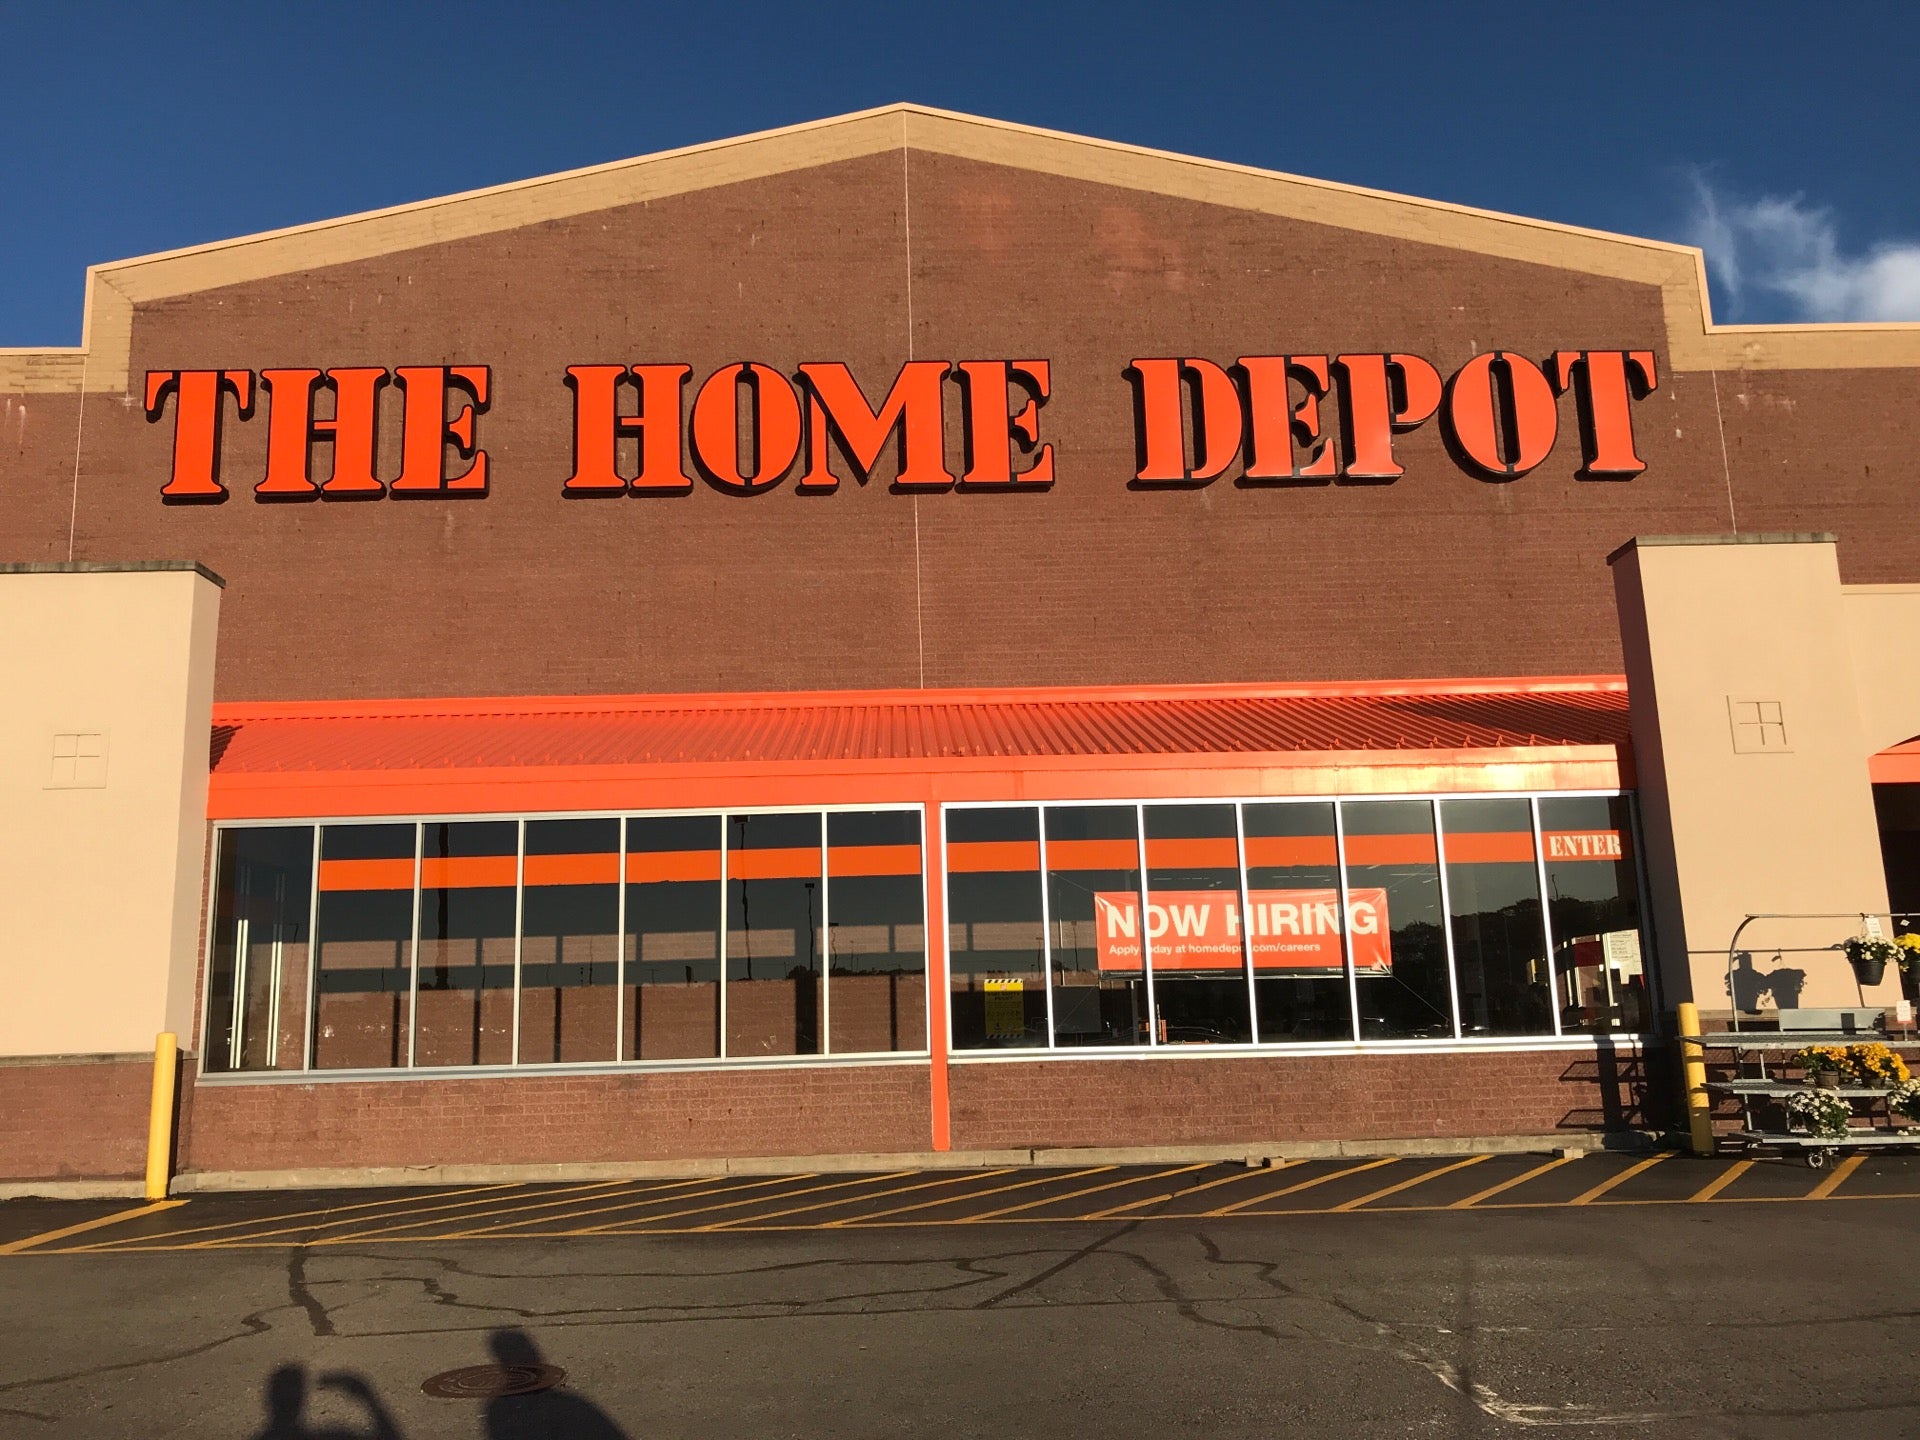 The Home Depot - Wyoming, MI 49418